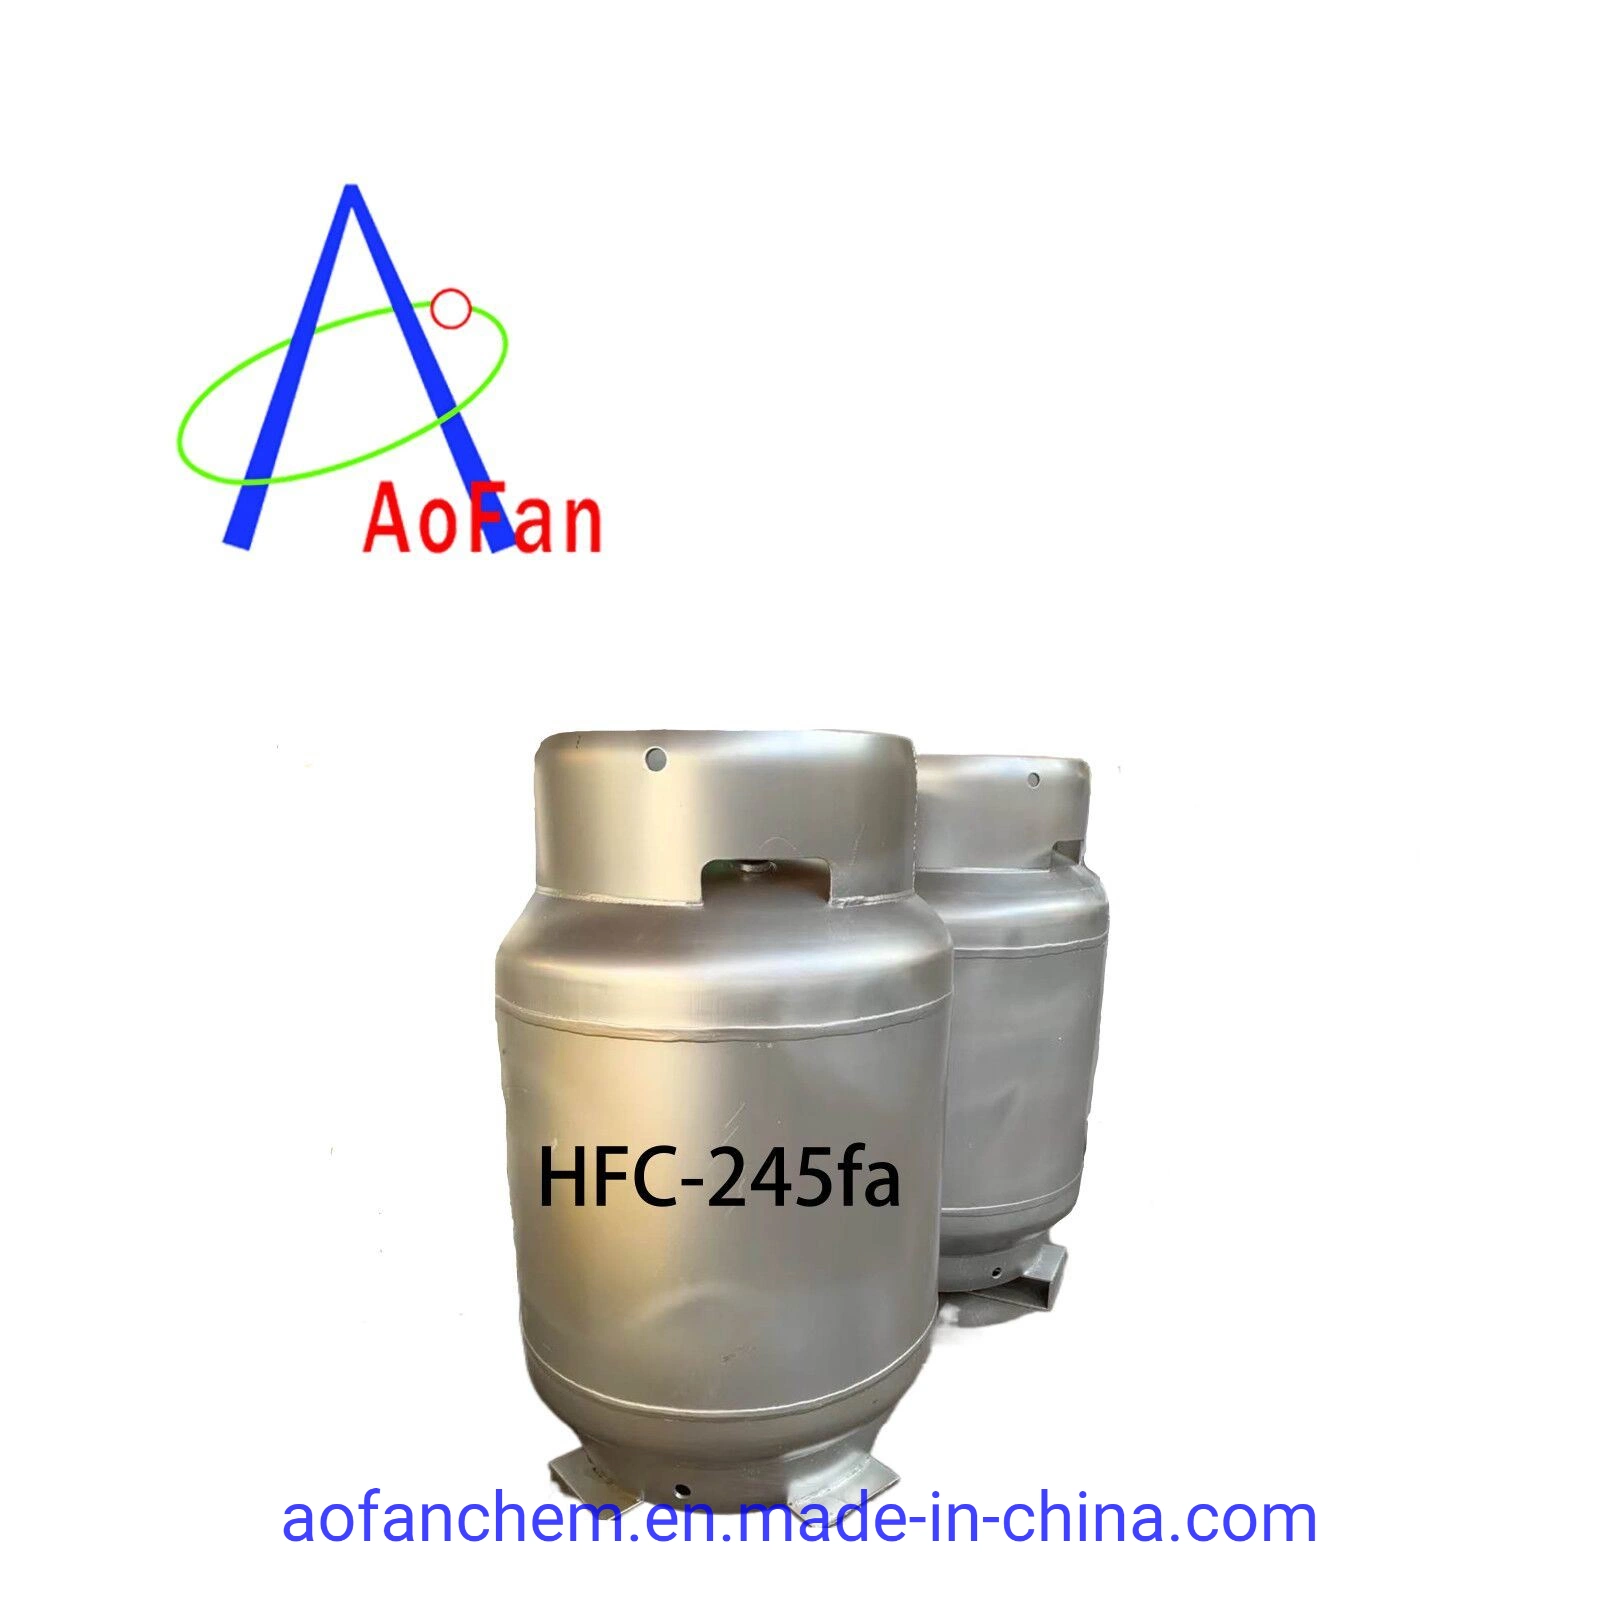 Original Factory Price Fluorine Refrigerant Chinese Manufacturer From China Hfc-245fa